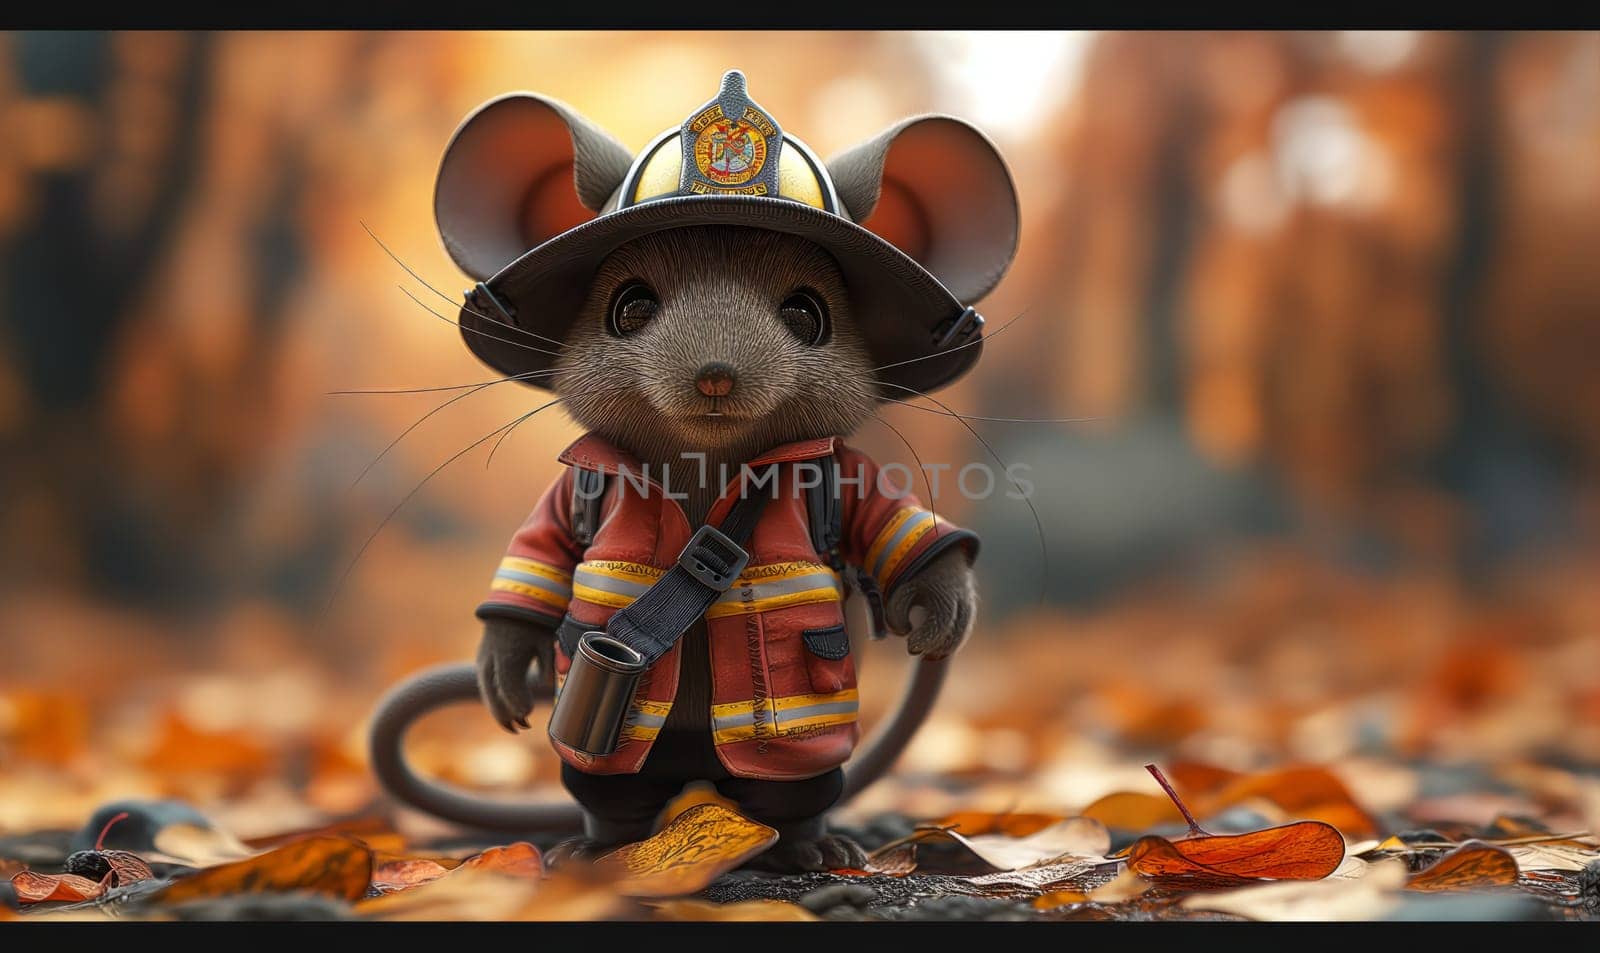 Illustration, mouse fireman on a blurred background. by Fischeron